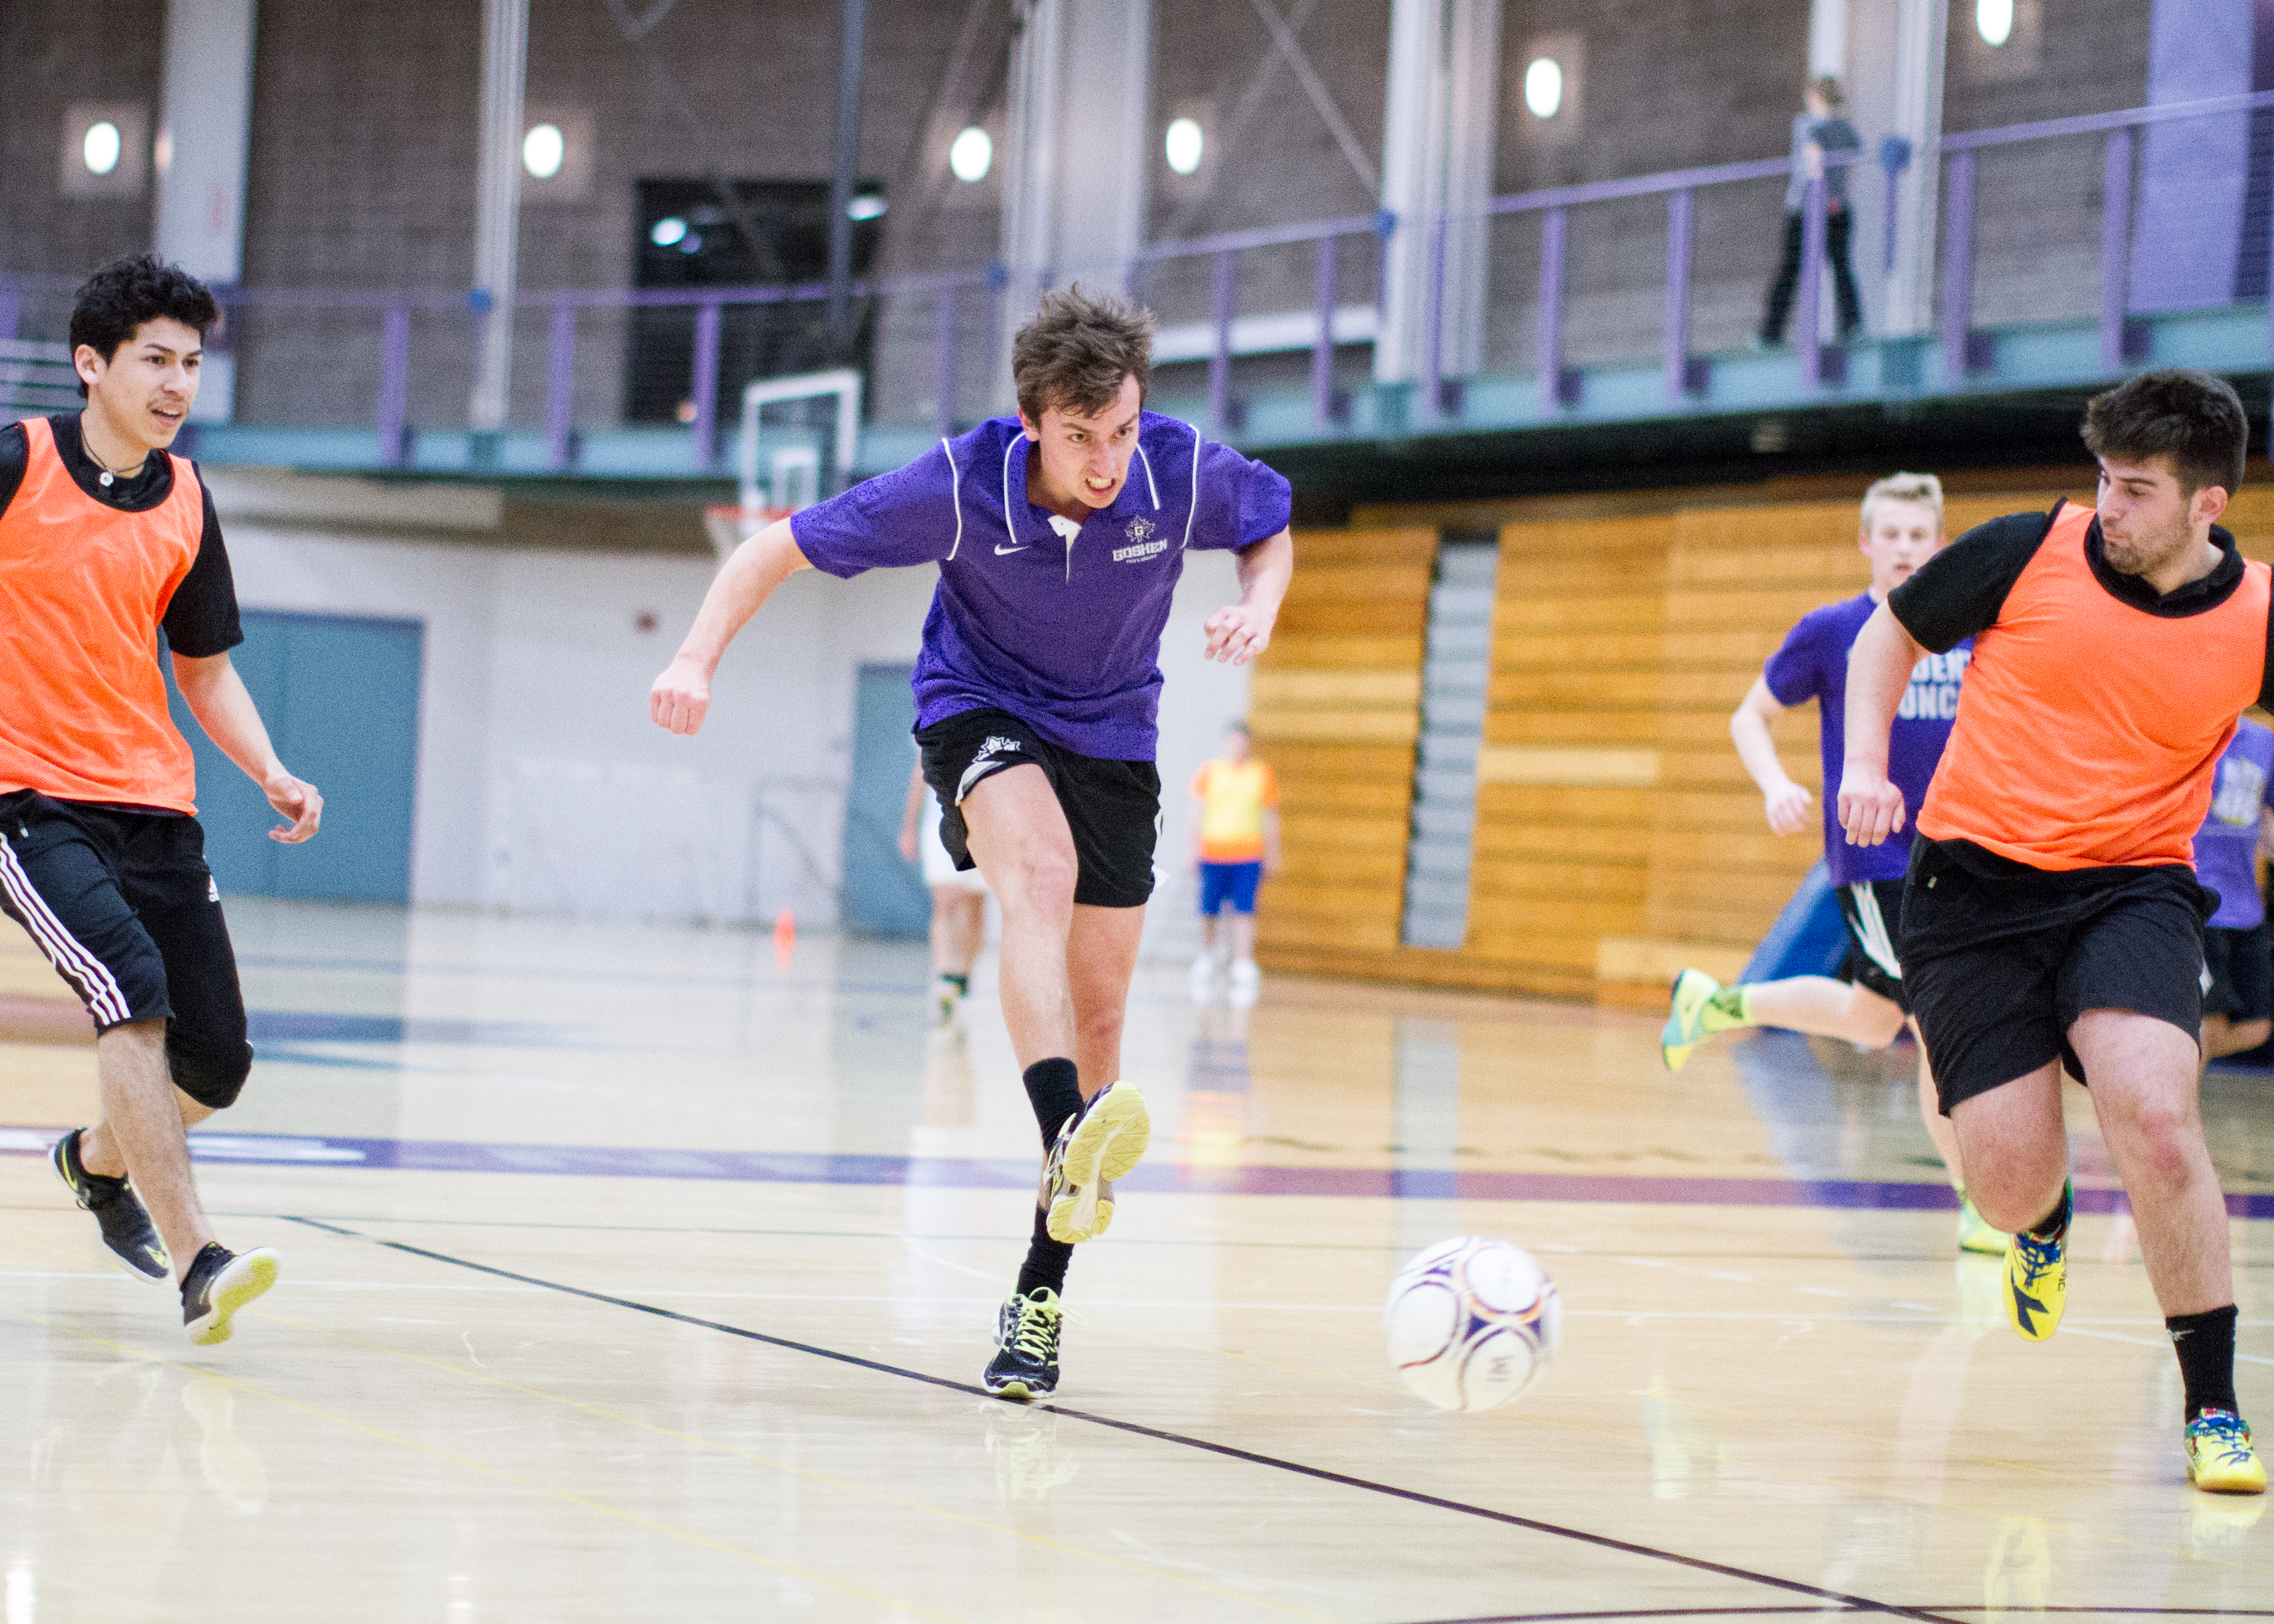 Three students play a game of intramural soccer in the RFC